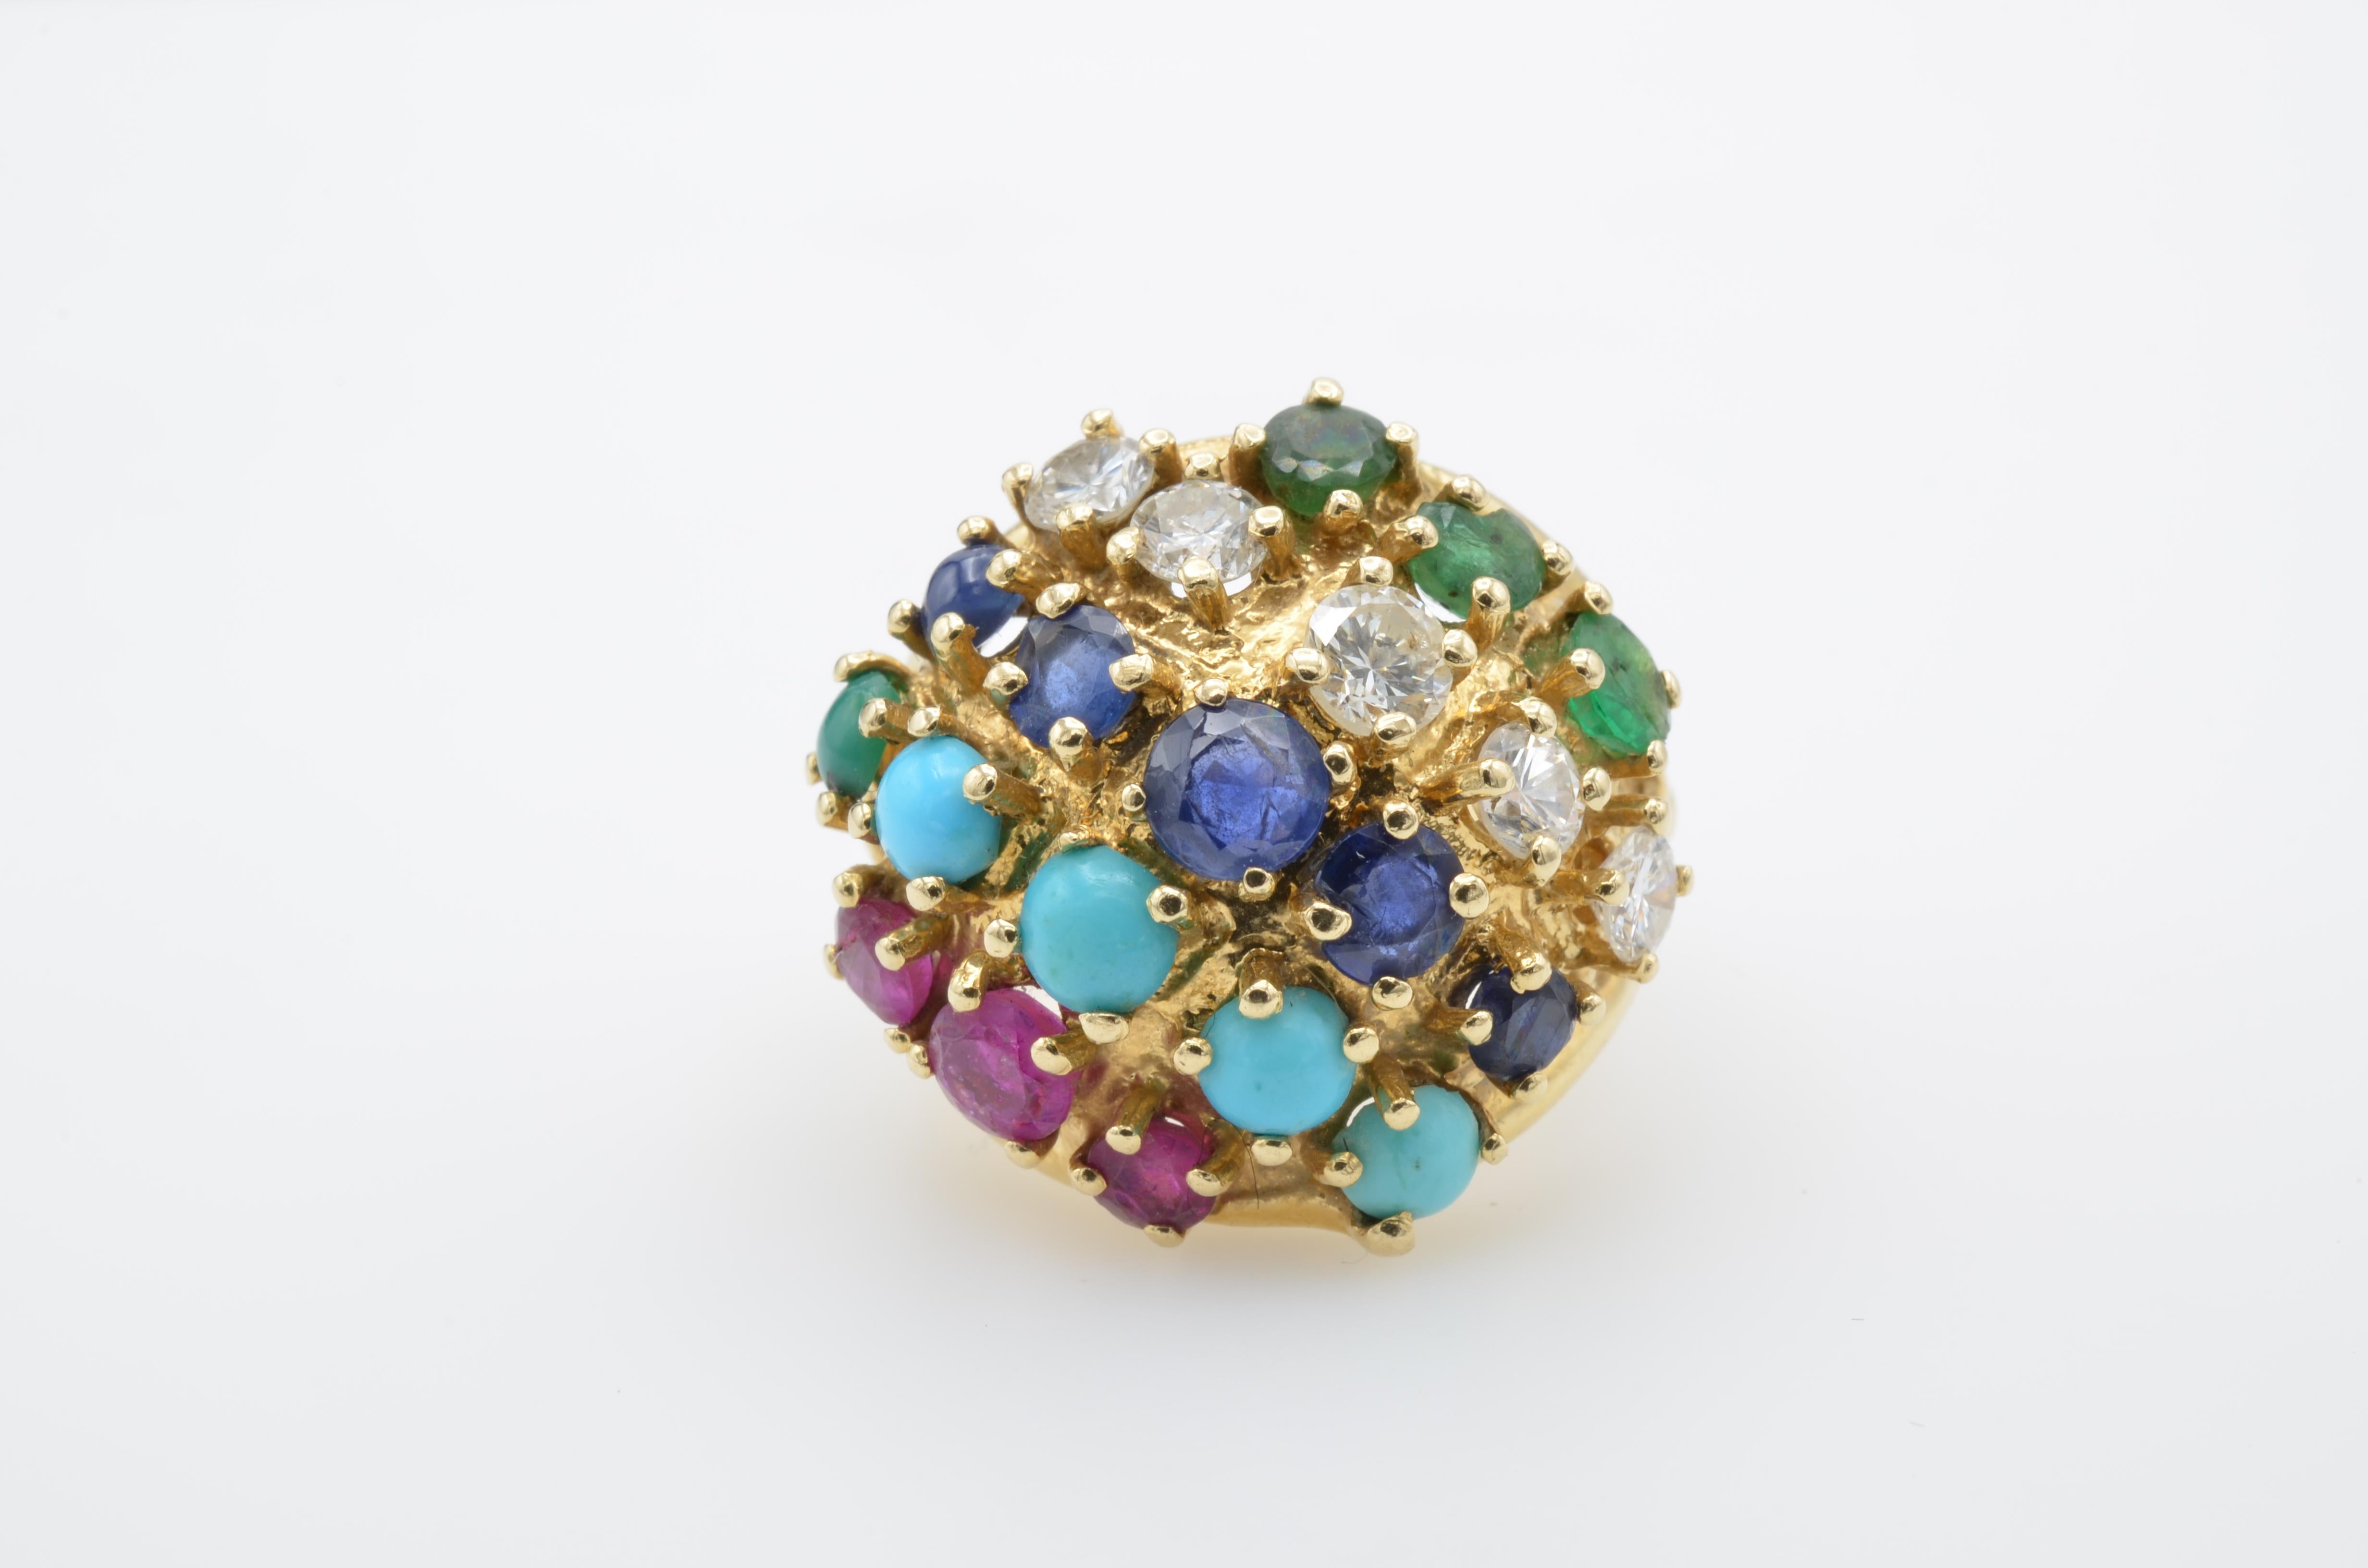 This fun and fanciful ring is a kaleidoscope of color accented with dazzling diamonds. The rubies, emeralds, sapphires and turquoise are a rainbow of color. This ring is a conversation starter and a walk down memory lane. It is a size 4 1/2 and can